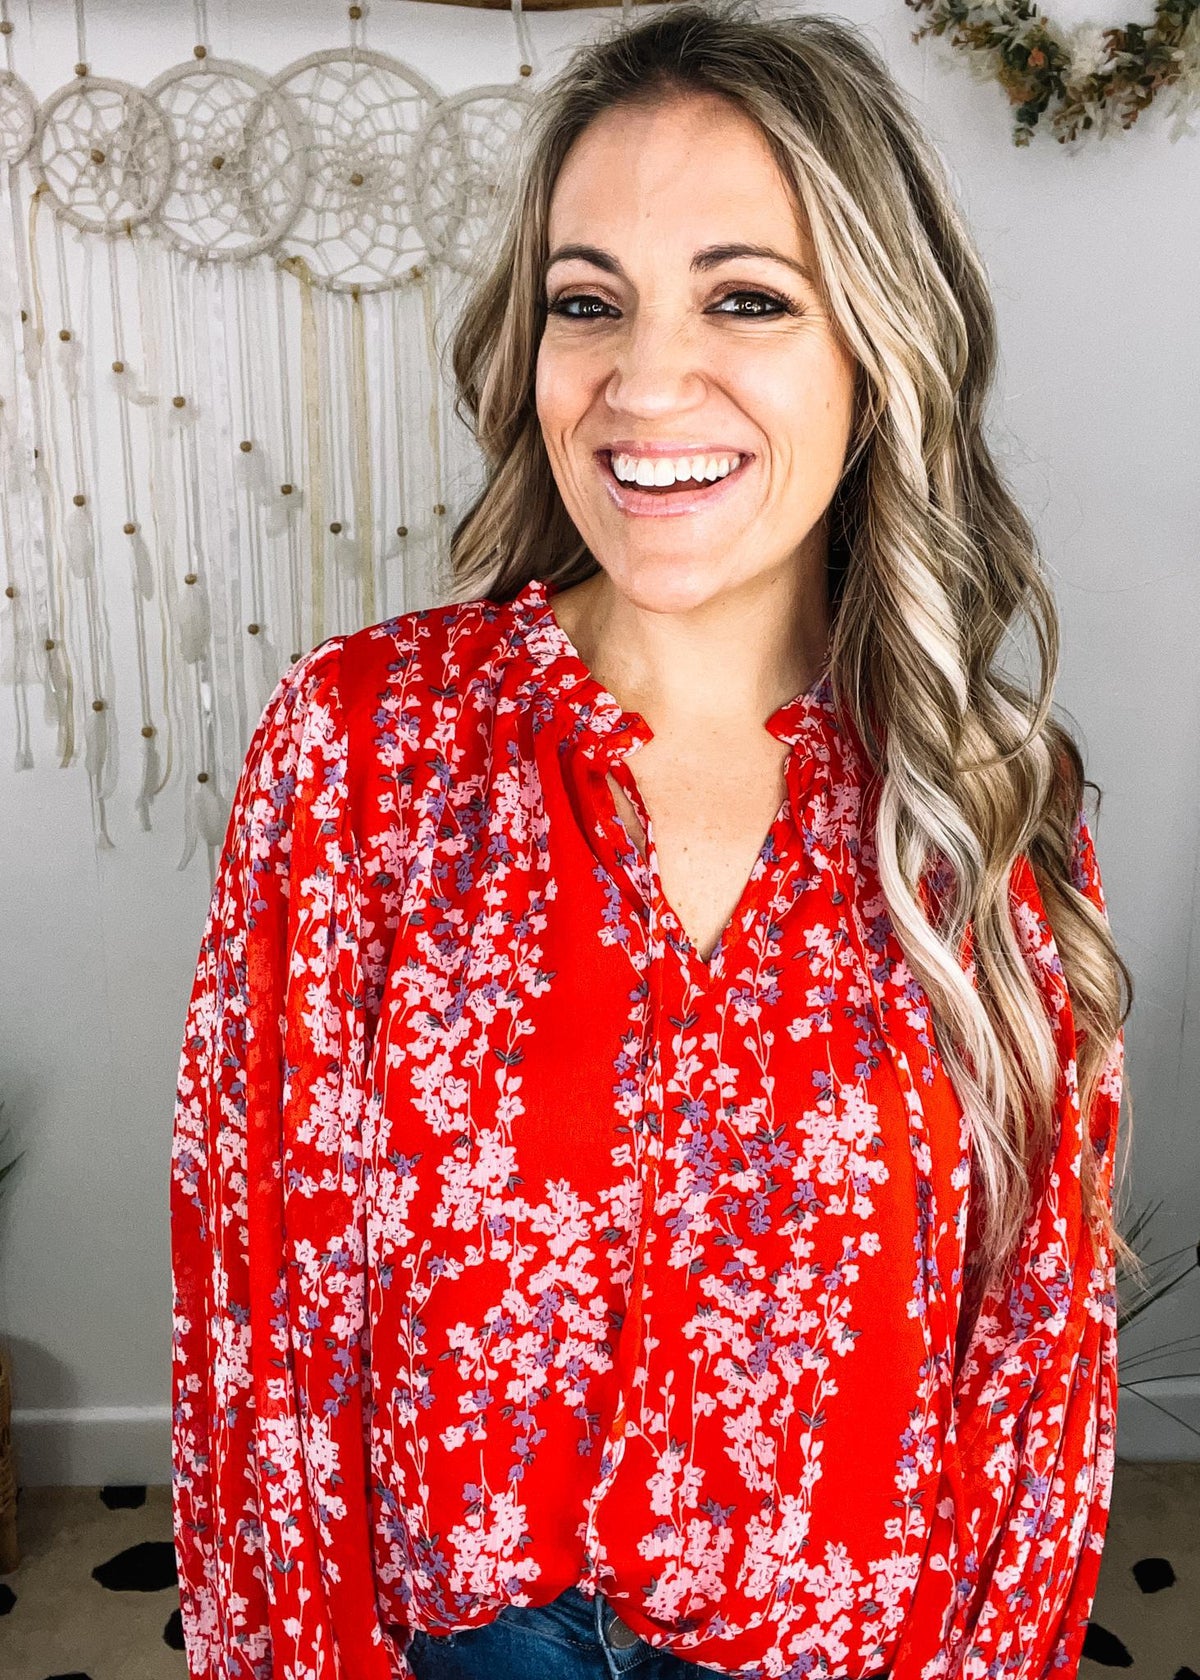 Bright Red Floral Chiffon Blouse